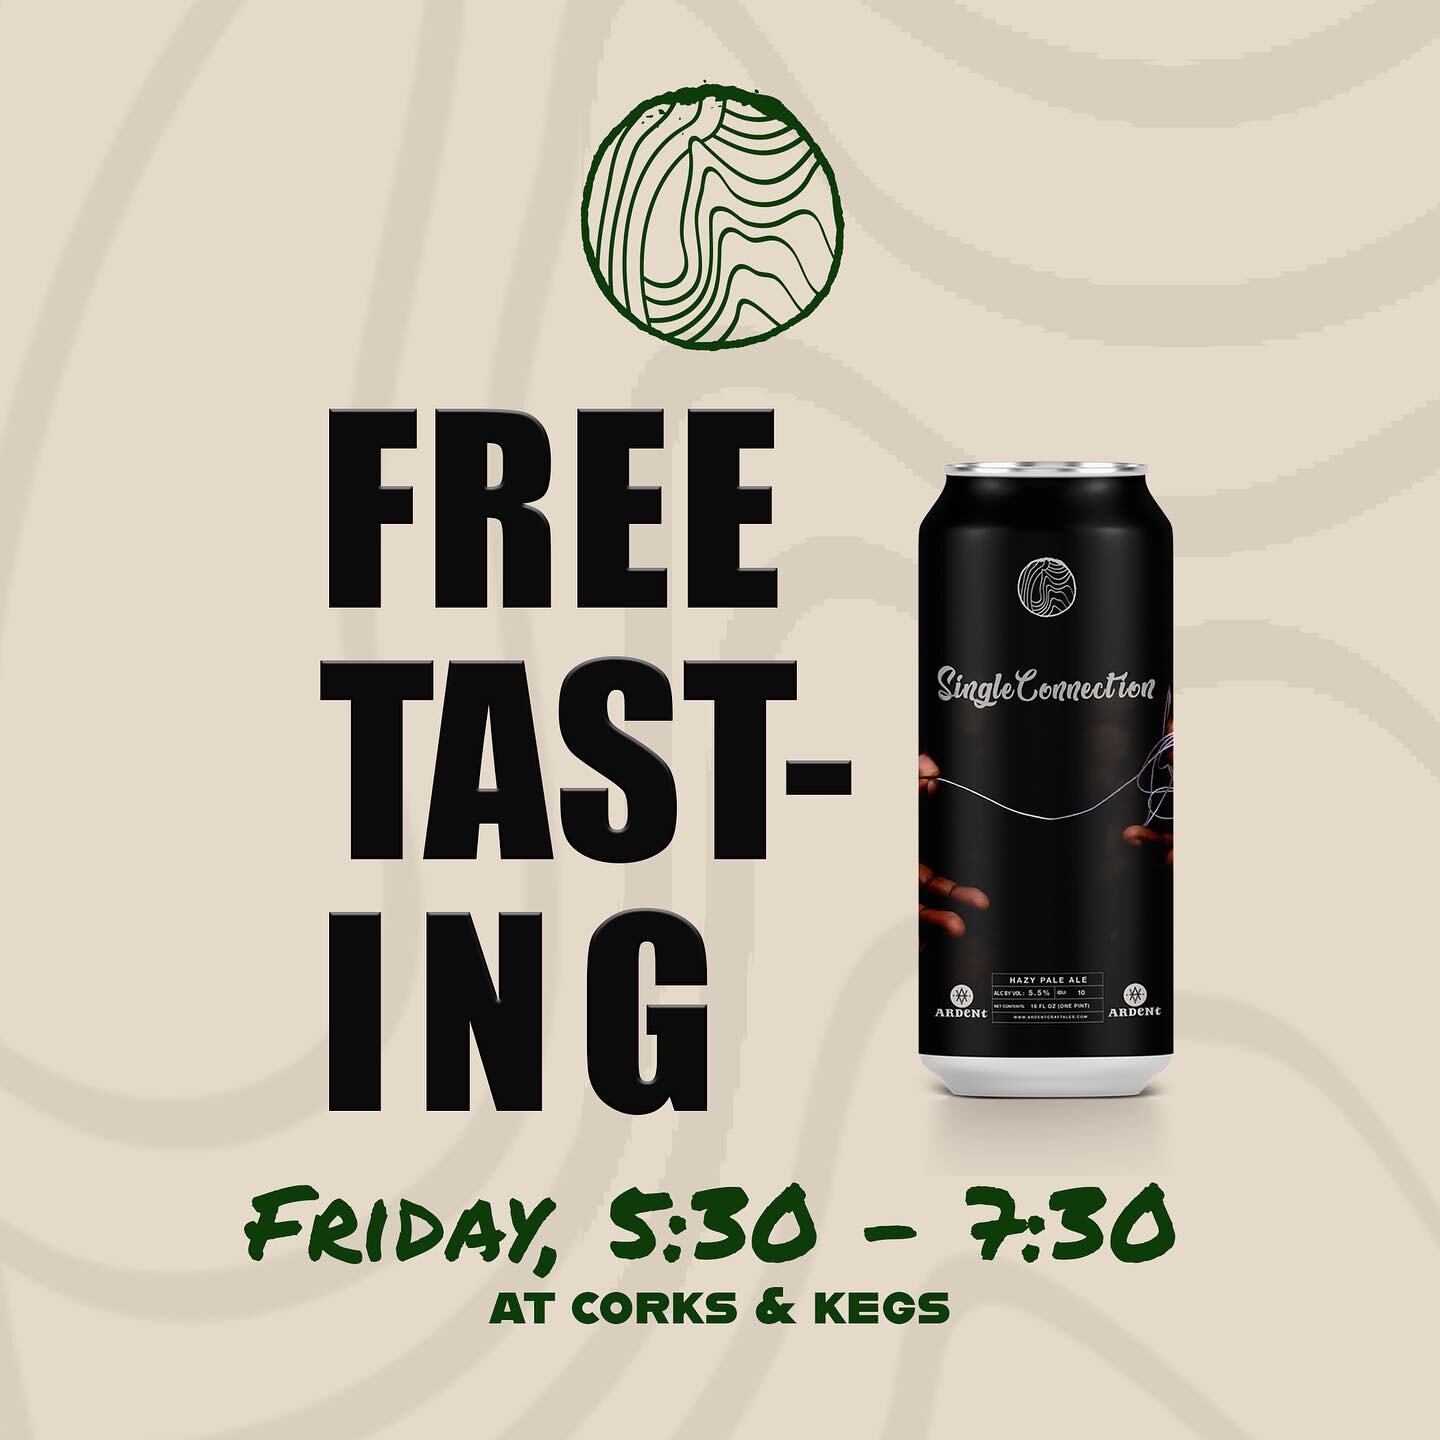 Check it! If you haven&rsquo;t had the chance to try Single Connection, @corksandkegs is holding a Free Tasting on Friday from 5:30p  to 7:30p. 

We&rsquo;ll be there to talk about the beer, the meaning behind what we&rsquo;ve created, and what&rsquo